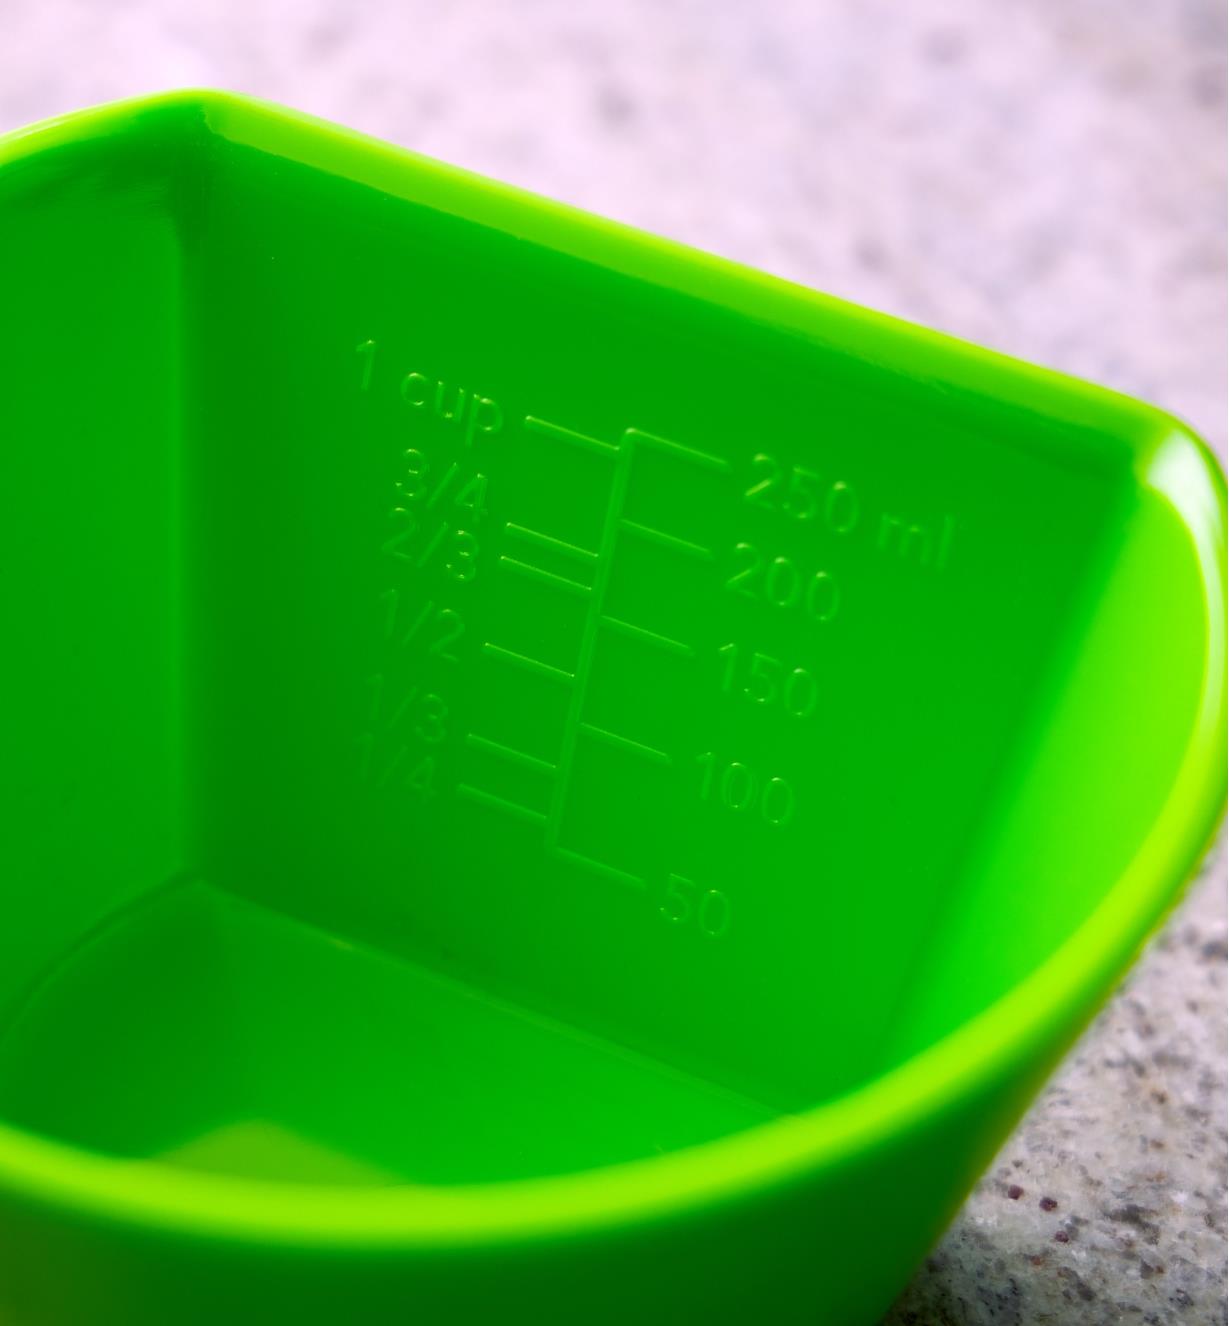 Close-up view of graduations marked on the inside of a scoop measuring bowl